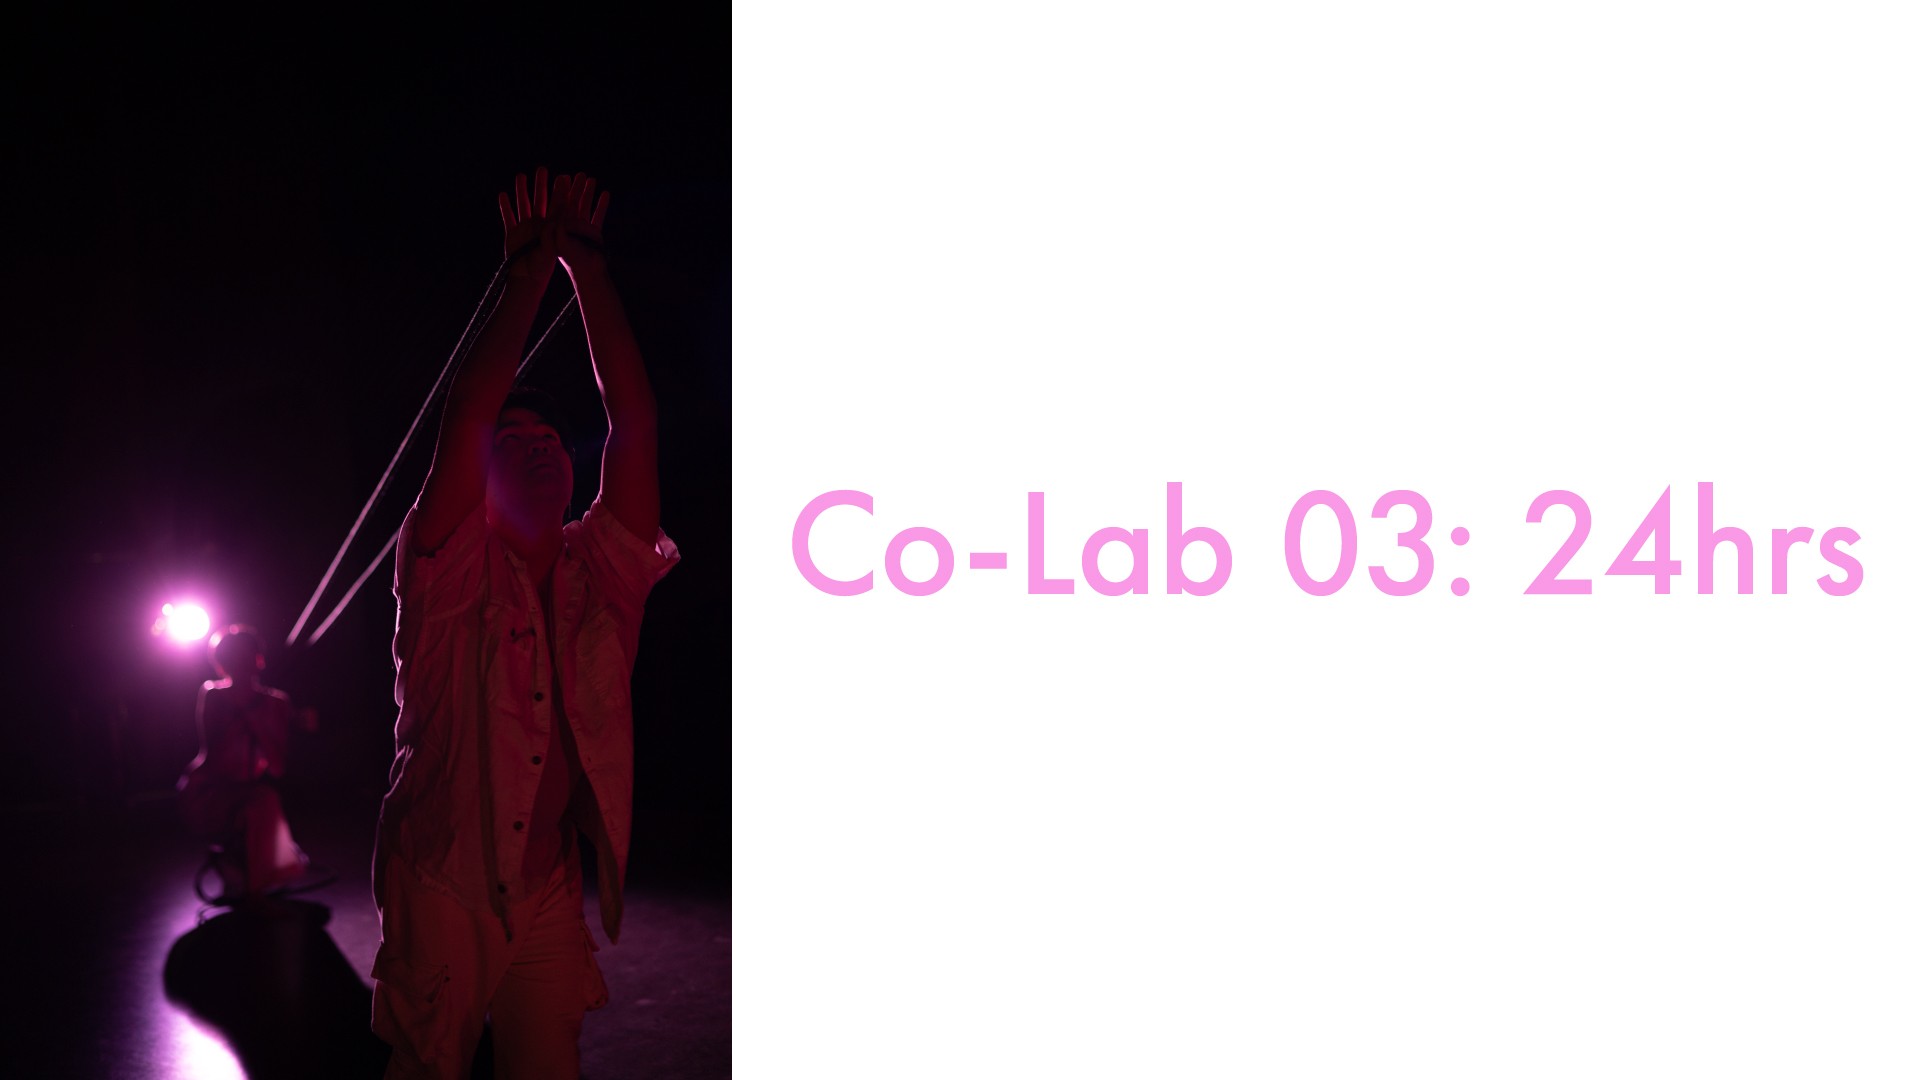 Co-Lab 03: 24hrs